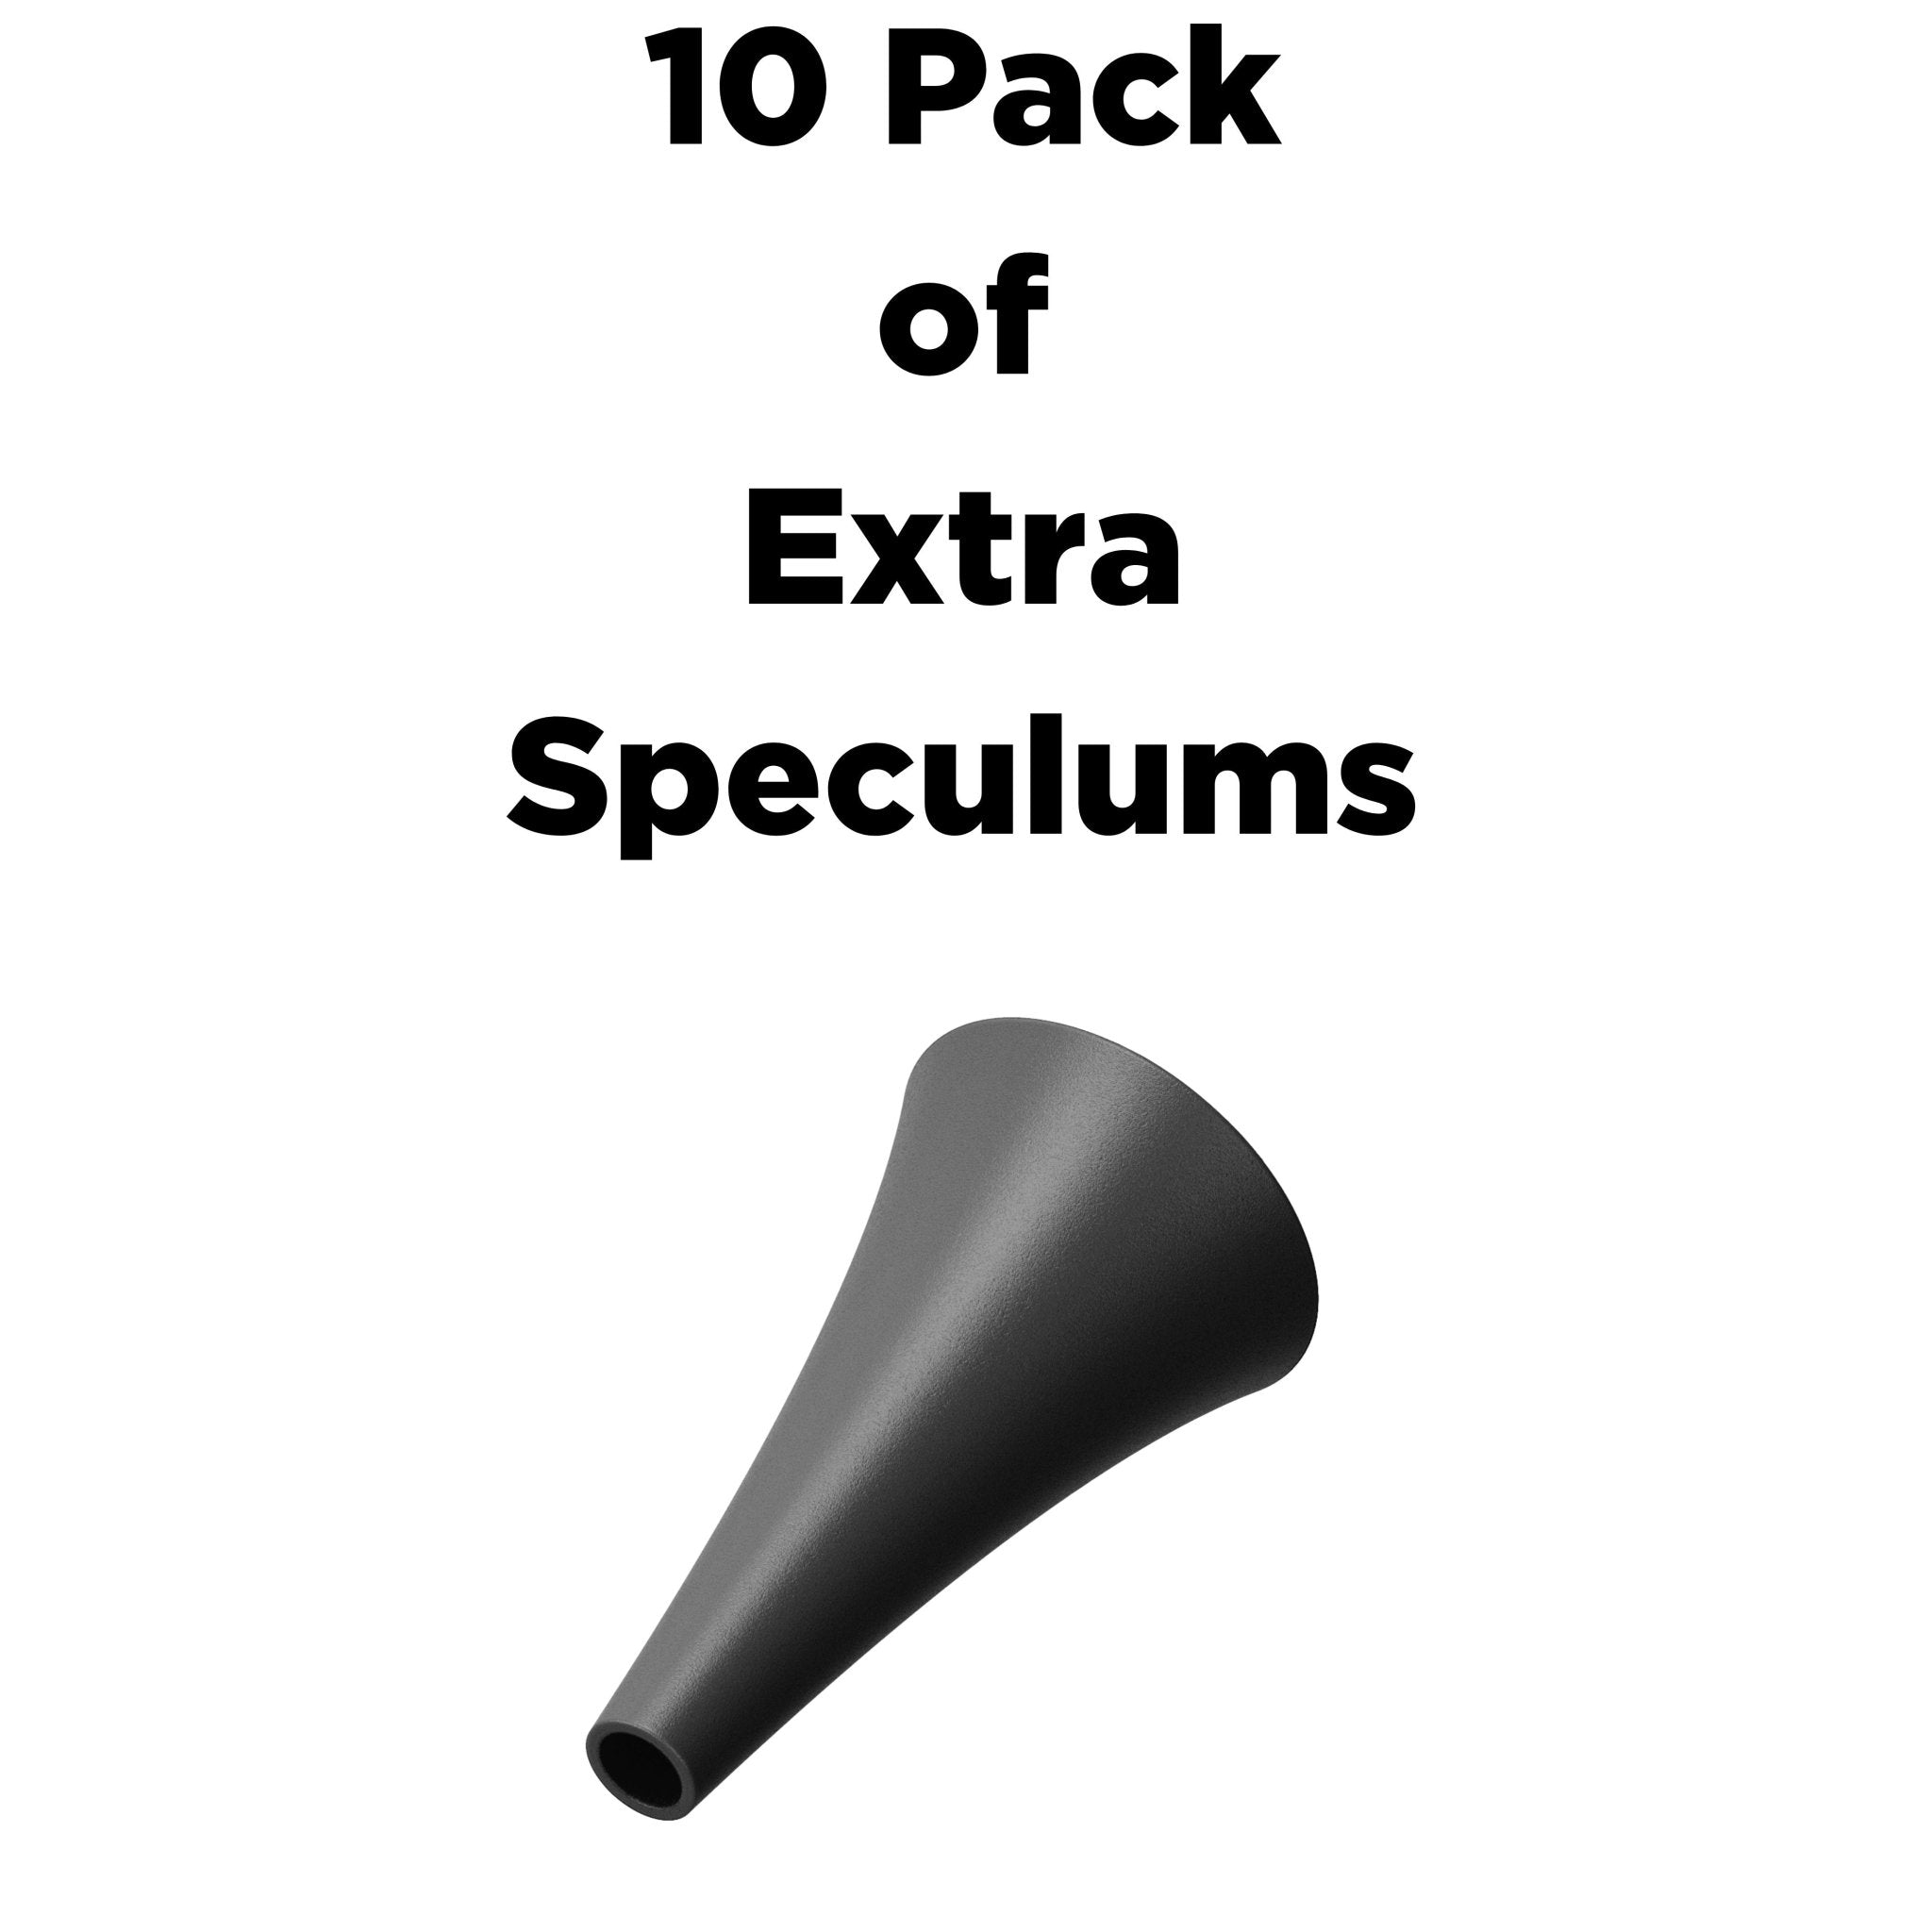 10 - Piece Speculum Set for Use with MOBI Smart Bluetooth Otoscope - Professional Grade Accessories for Ear, Nose, and Throat Examination - MOBI USA